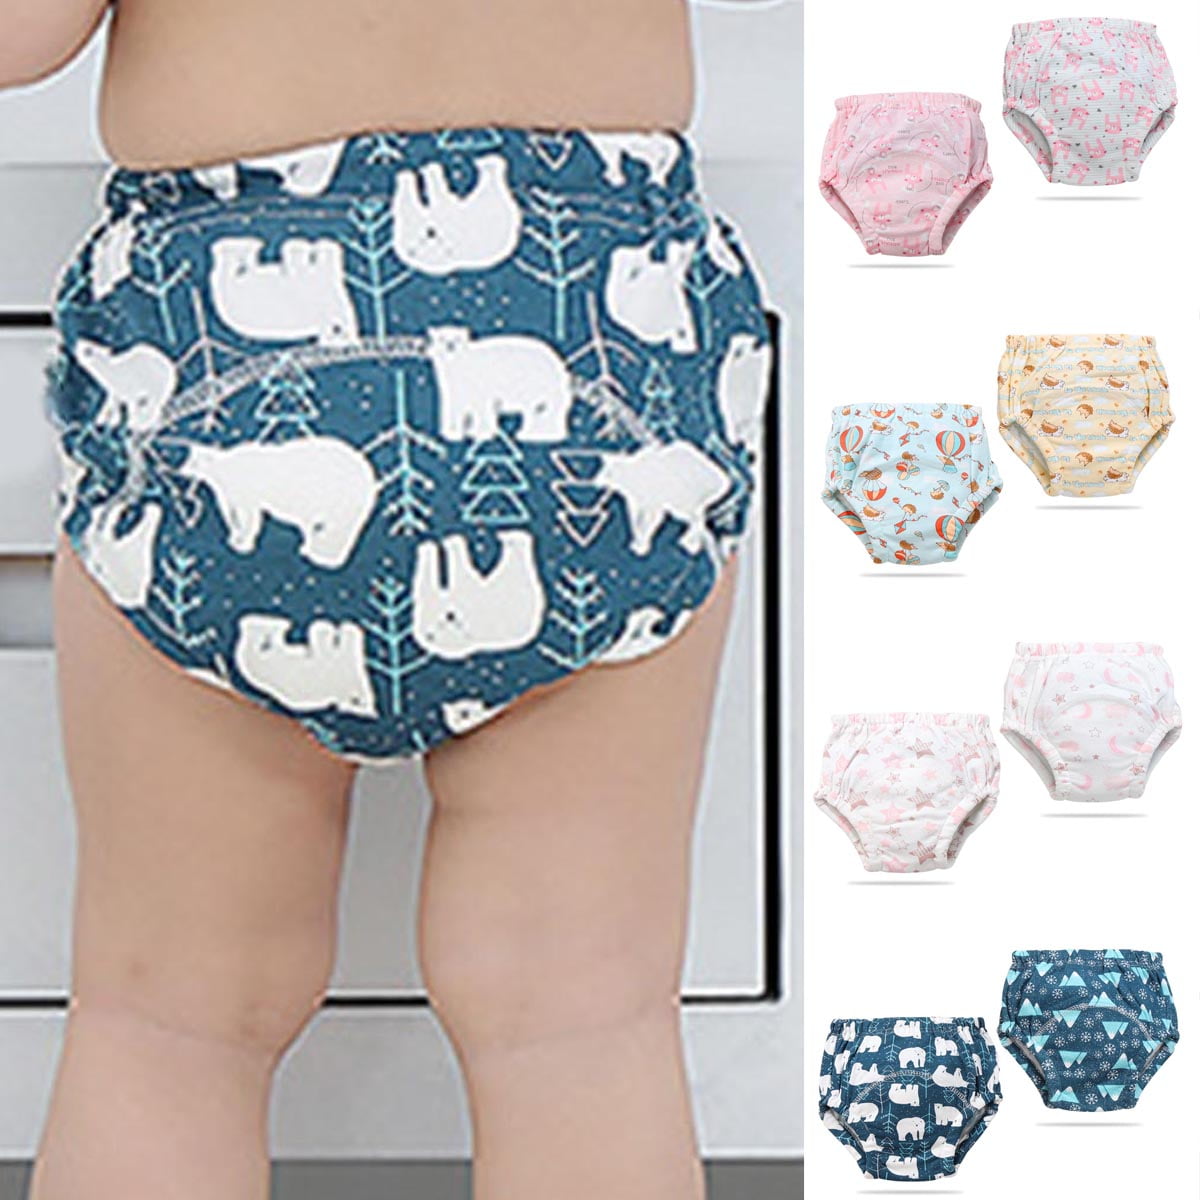  EZ Moms 4 Packs Plastic Pants For Toddlers Cloth Diaper Covers  Soft Reusable Portable Rubber Pants For Toddlers Boys And Girls Plastic  Training Pants For Toddlers With Baby Washable Wipes 2T 